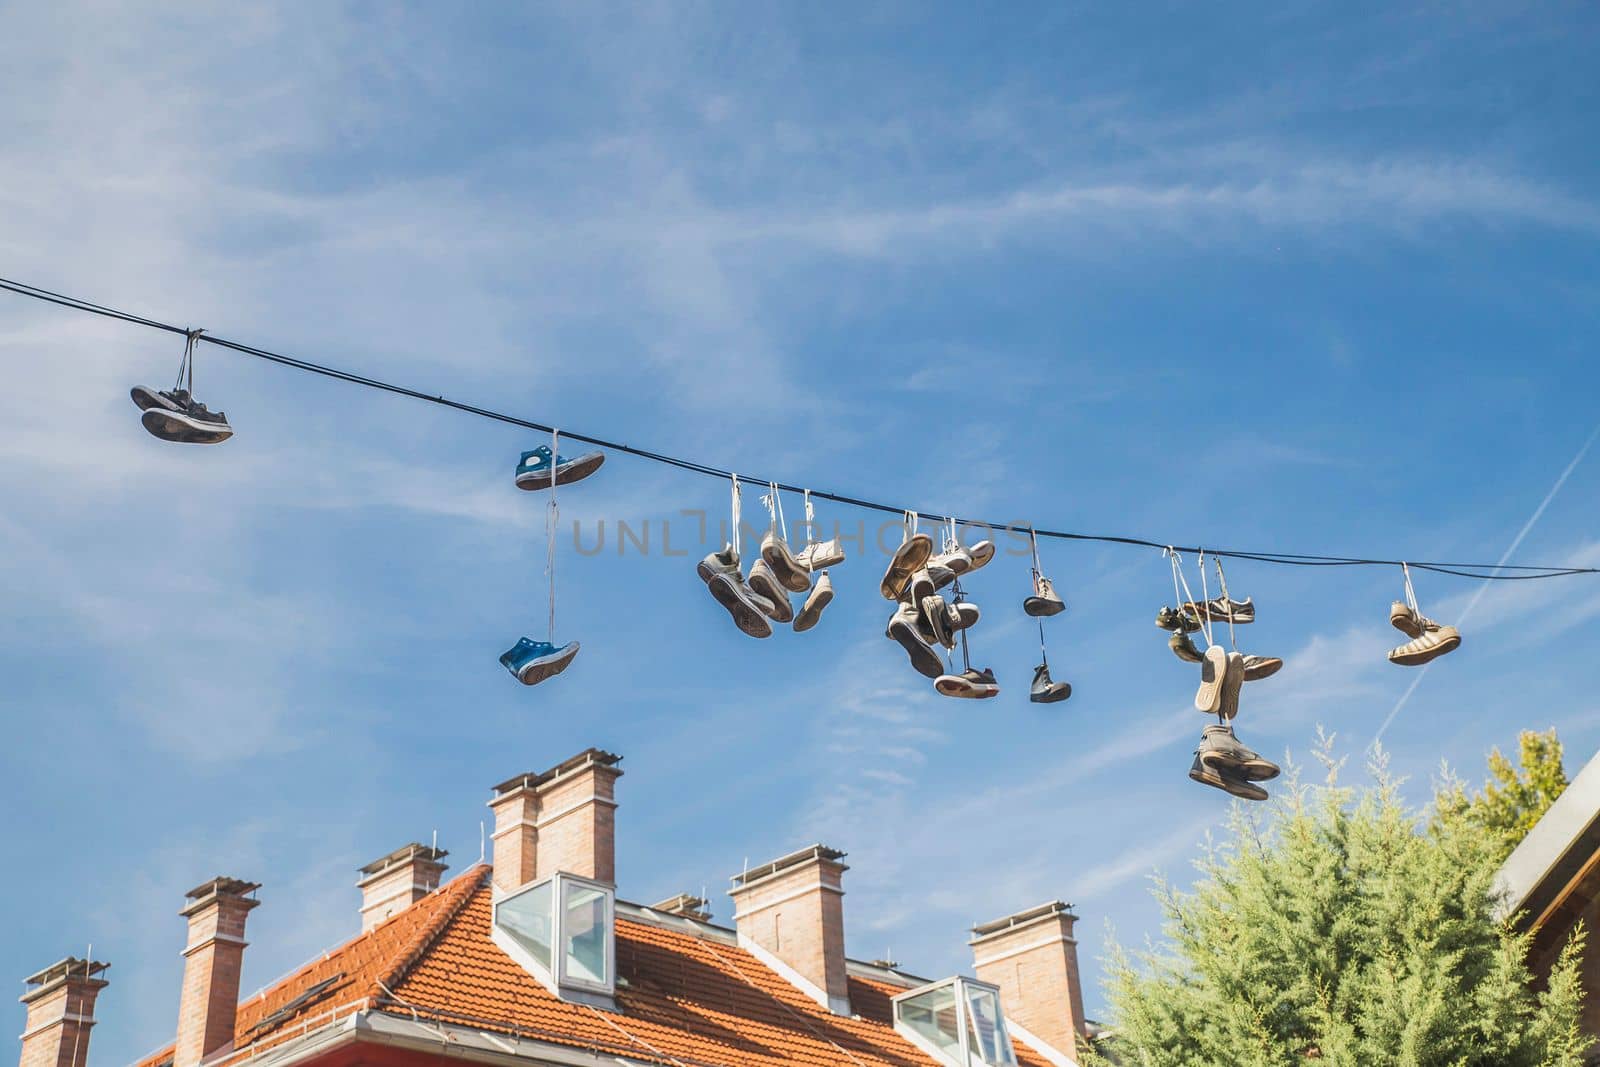 Old worn-out shoes hang from wires in slovenia.